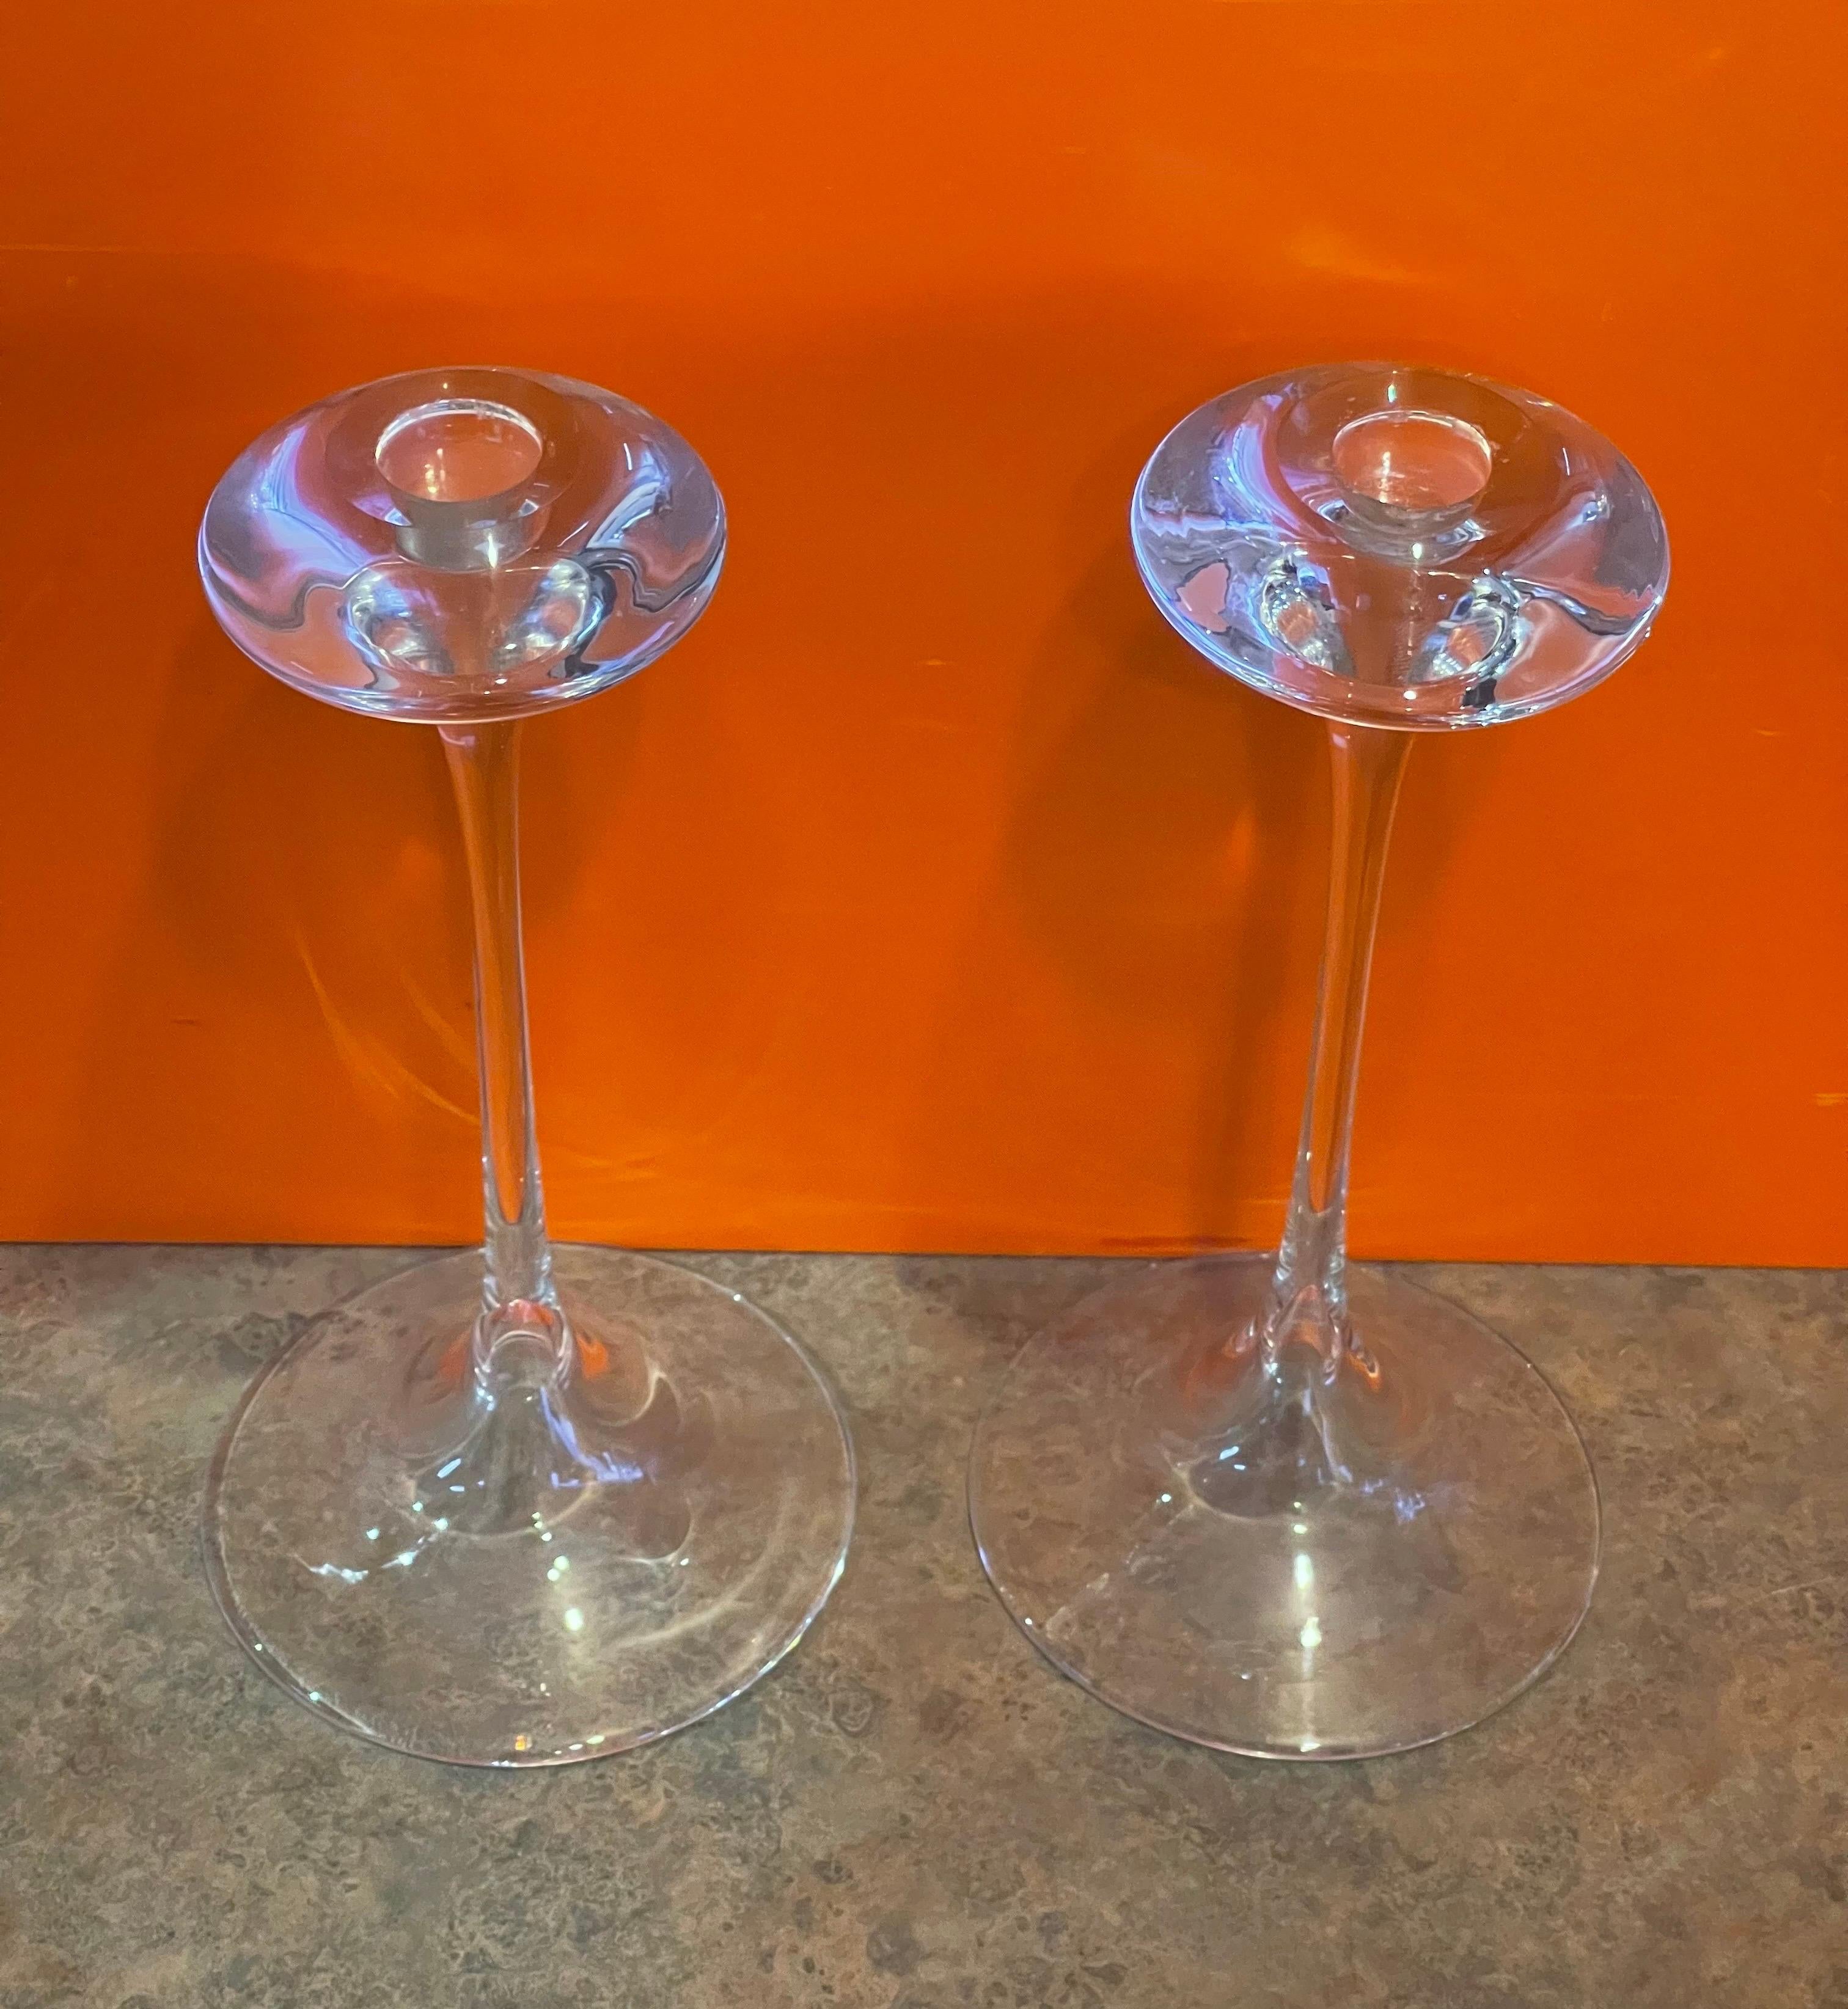 Hand-Crafted Pair of Crystal Candle Holders by Kjell Engman for Kosta Boda Sweden For Sale